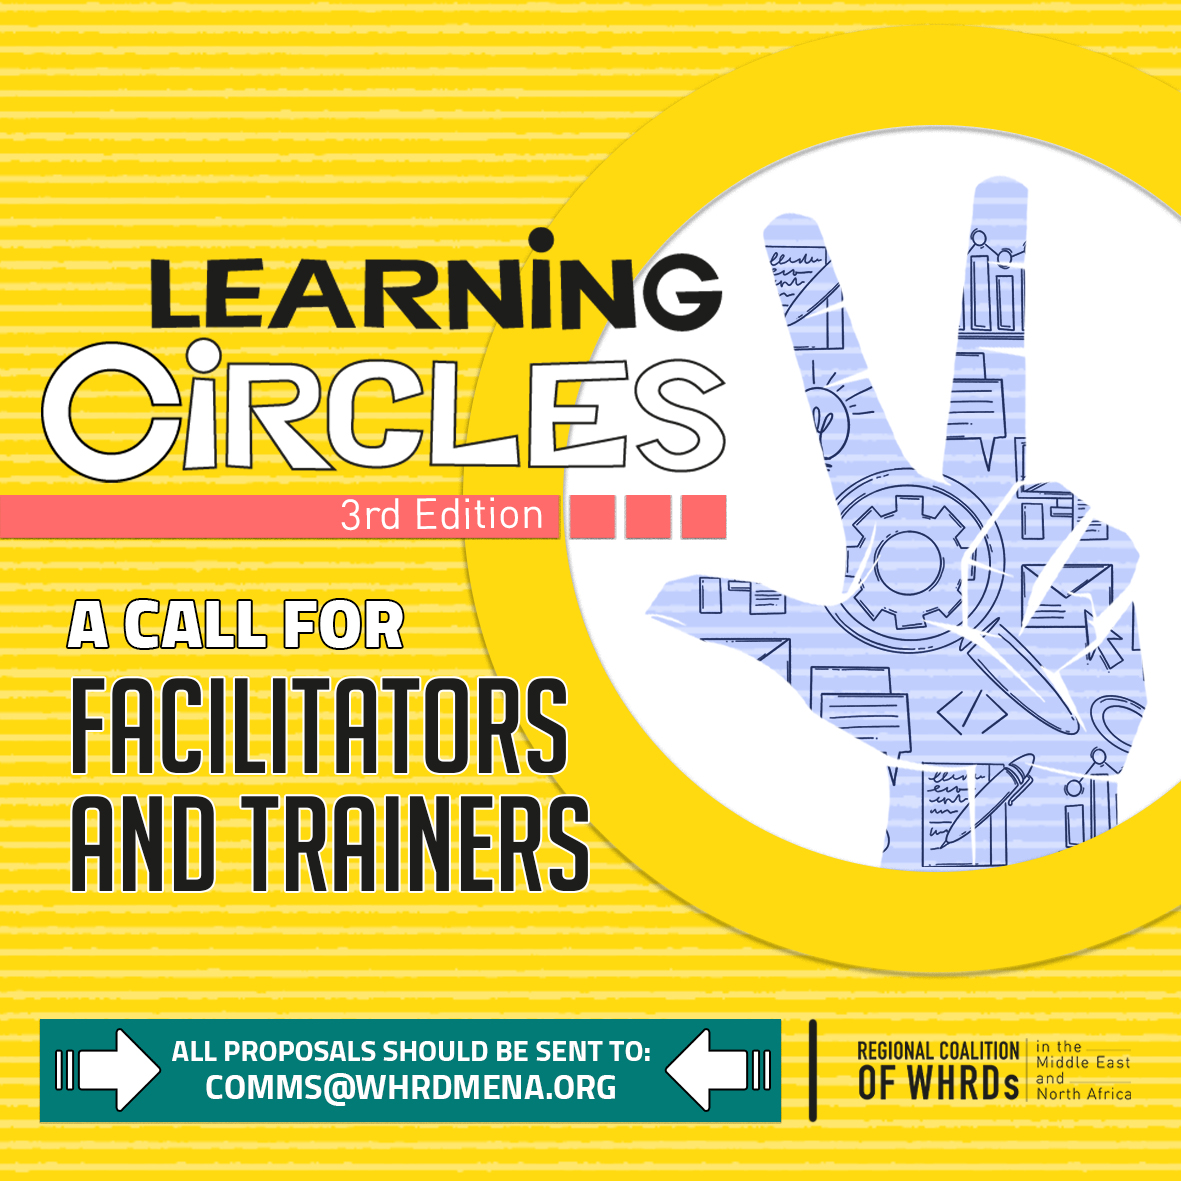 #LearningCircles mostly adopt a non-authoritarian, participatory & accessible free education format as an approach to teaching and learning processes that emphasize freedom, autonomy, and self-directed learning along with feminist principles & core values.
tinyurl.com/4bcut5sd